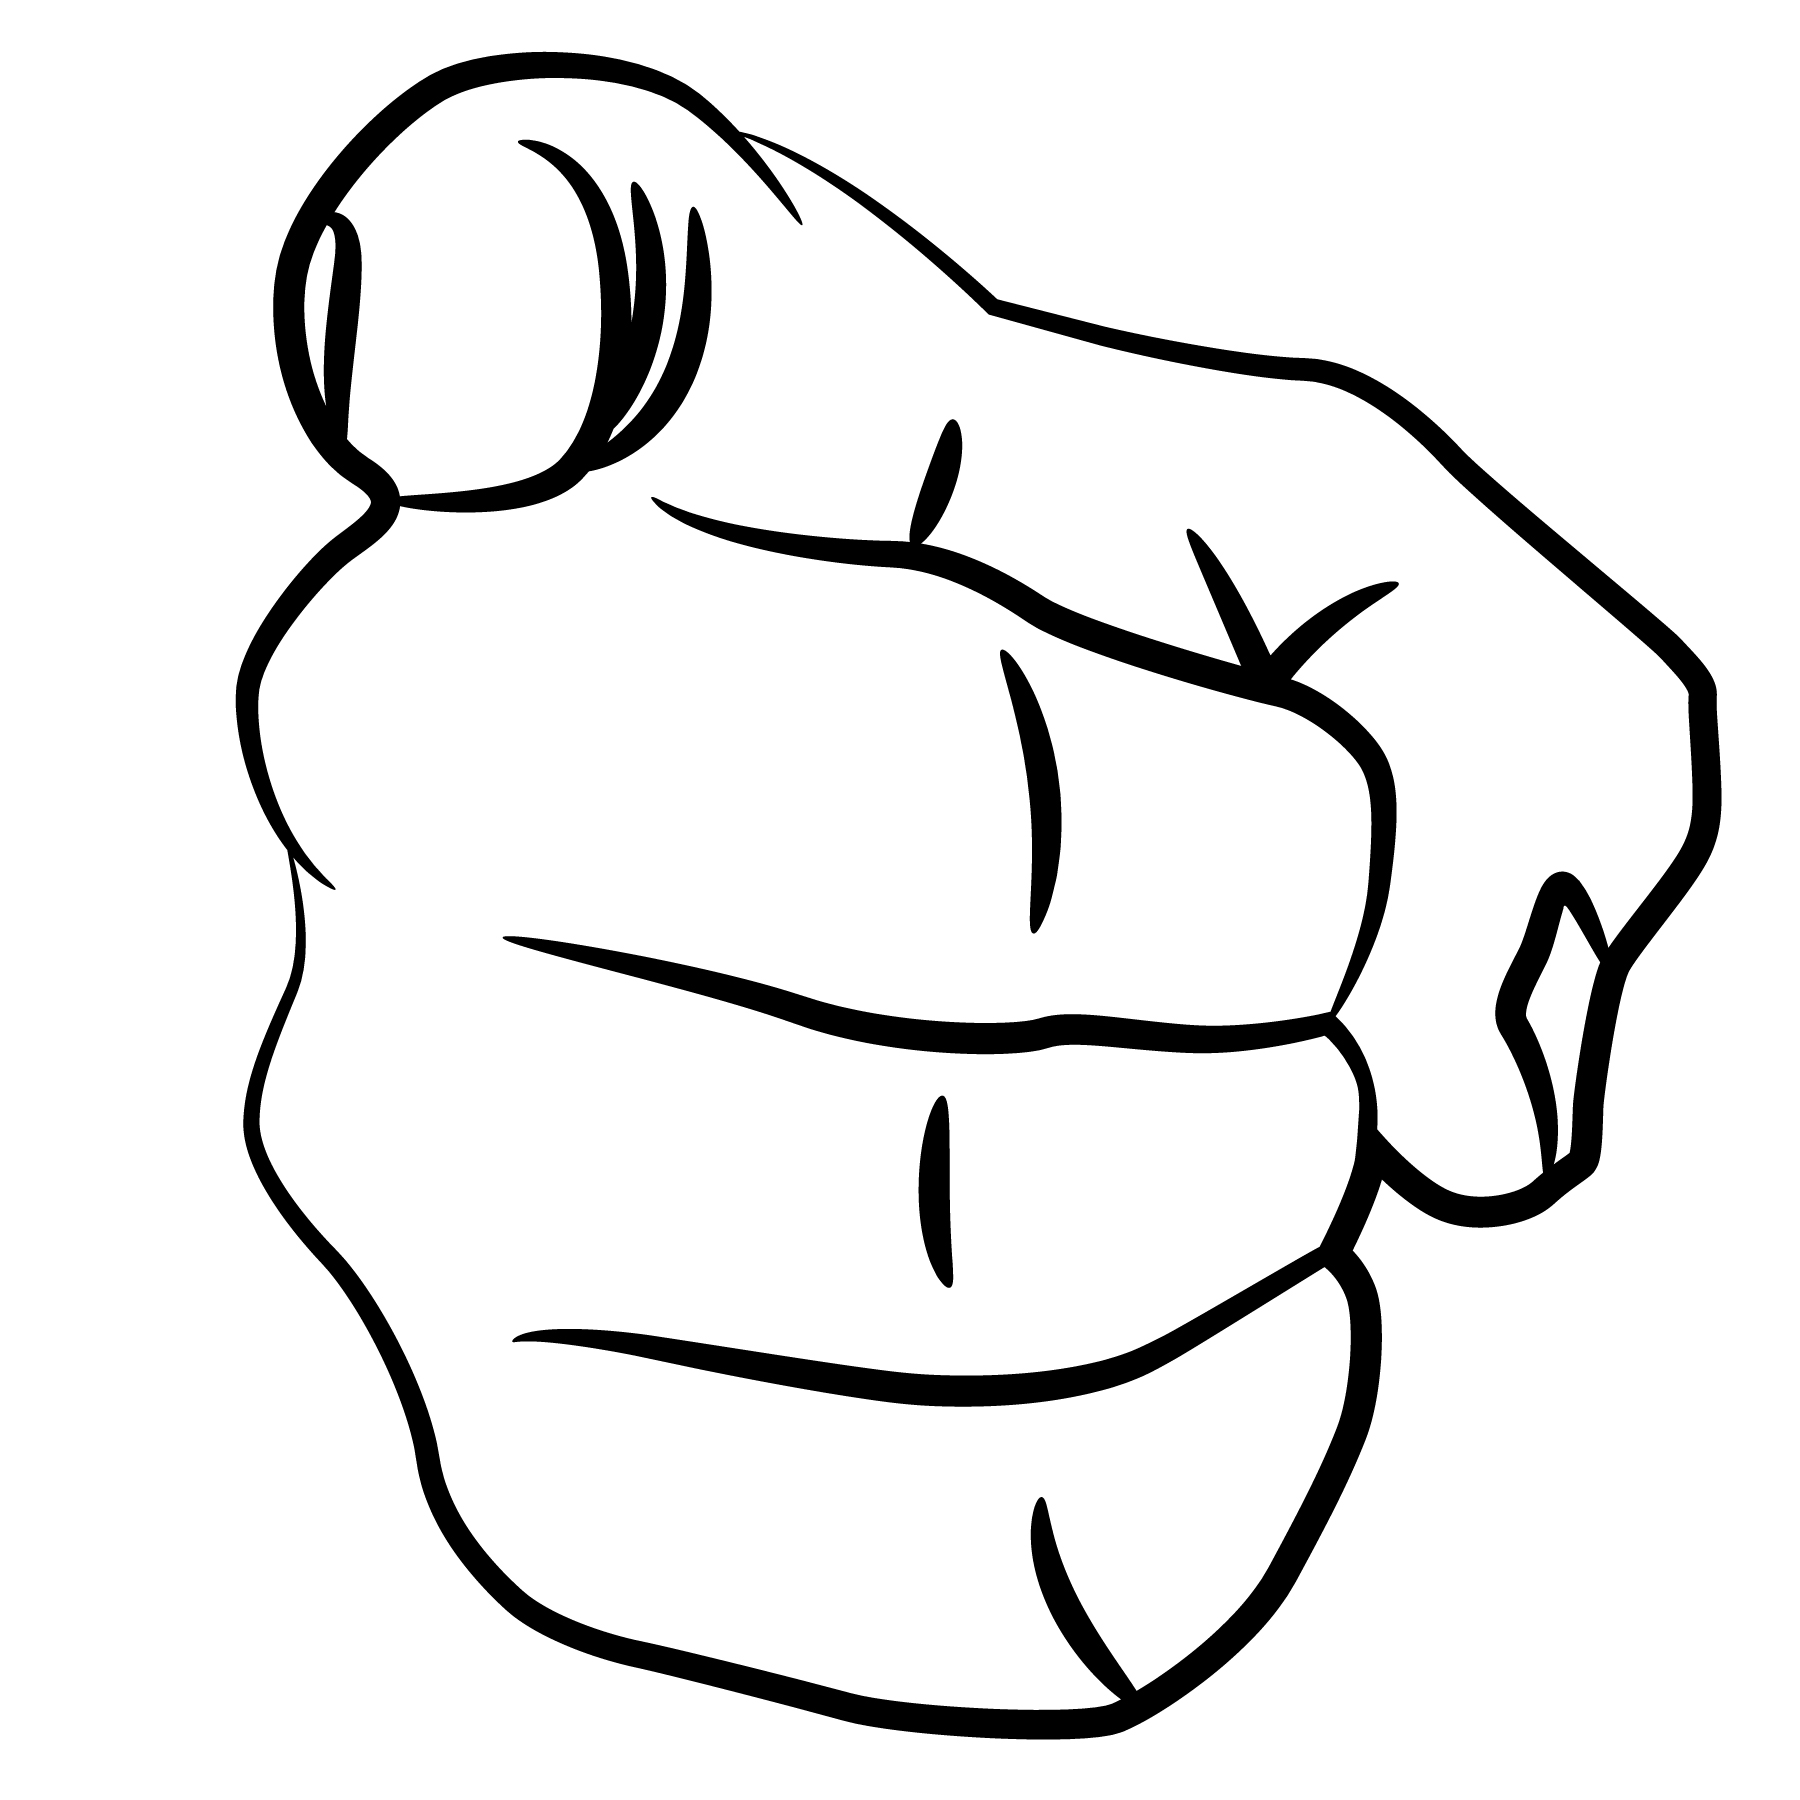 Download pointing finger vector - Download Free Vectors, Clipart ...